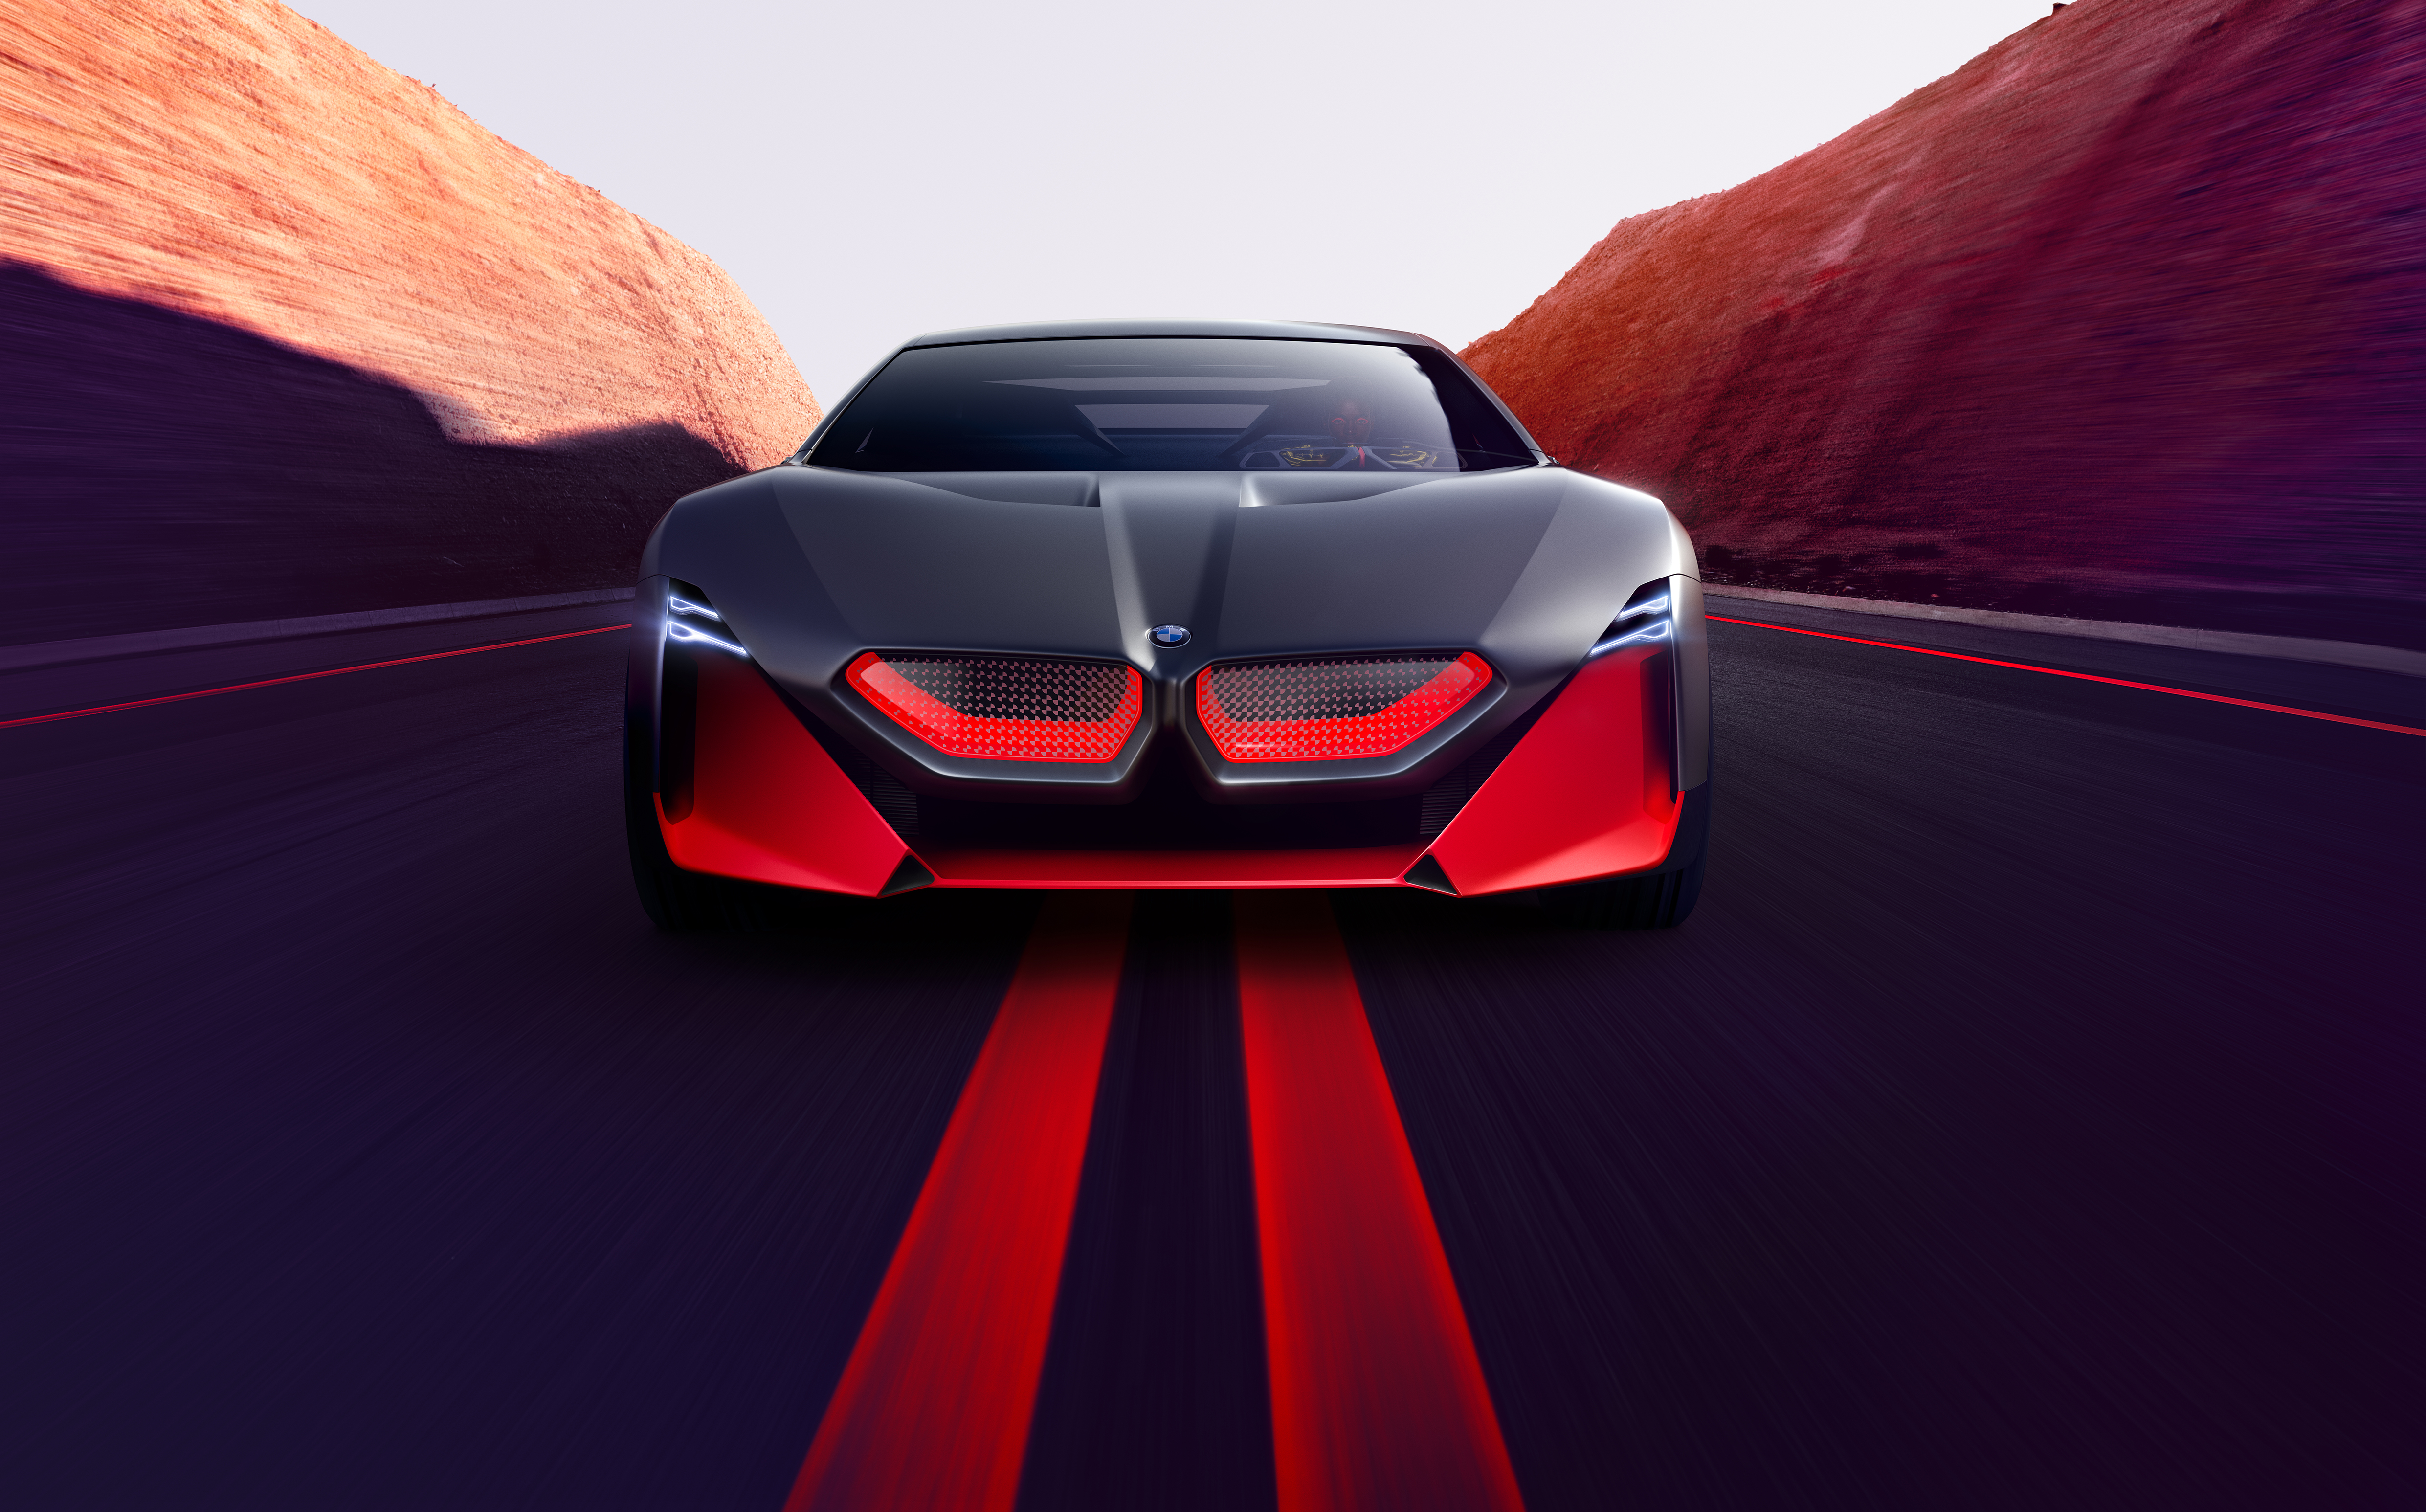 General 4961x3092 BMW Vision M NEXT vehicle car artwork sports car concept cars lights sun rays road red BMW supercars transport photo manipulation frontal view lines